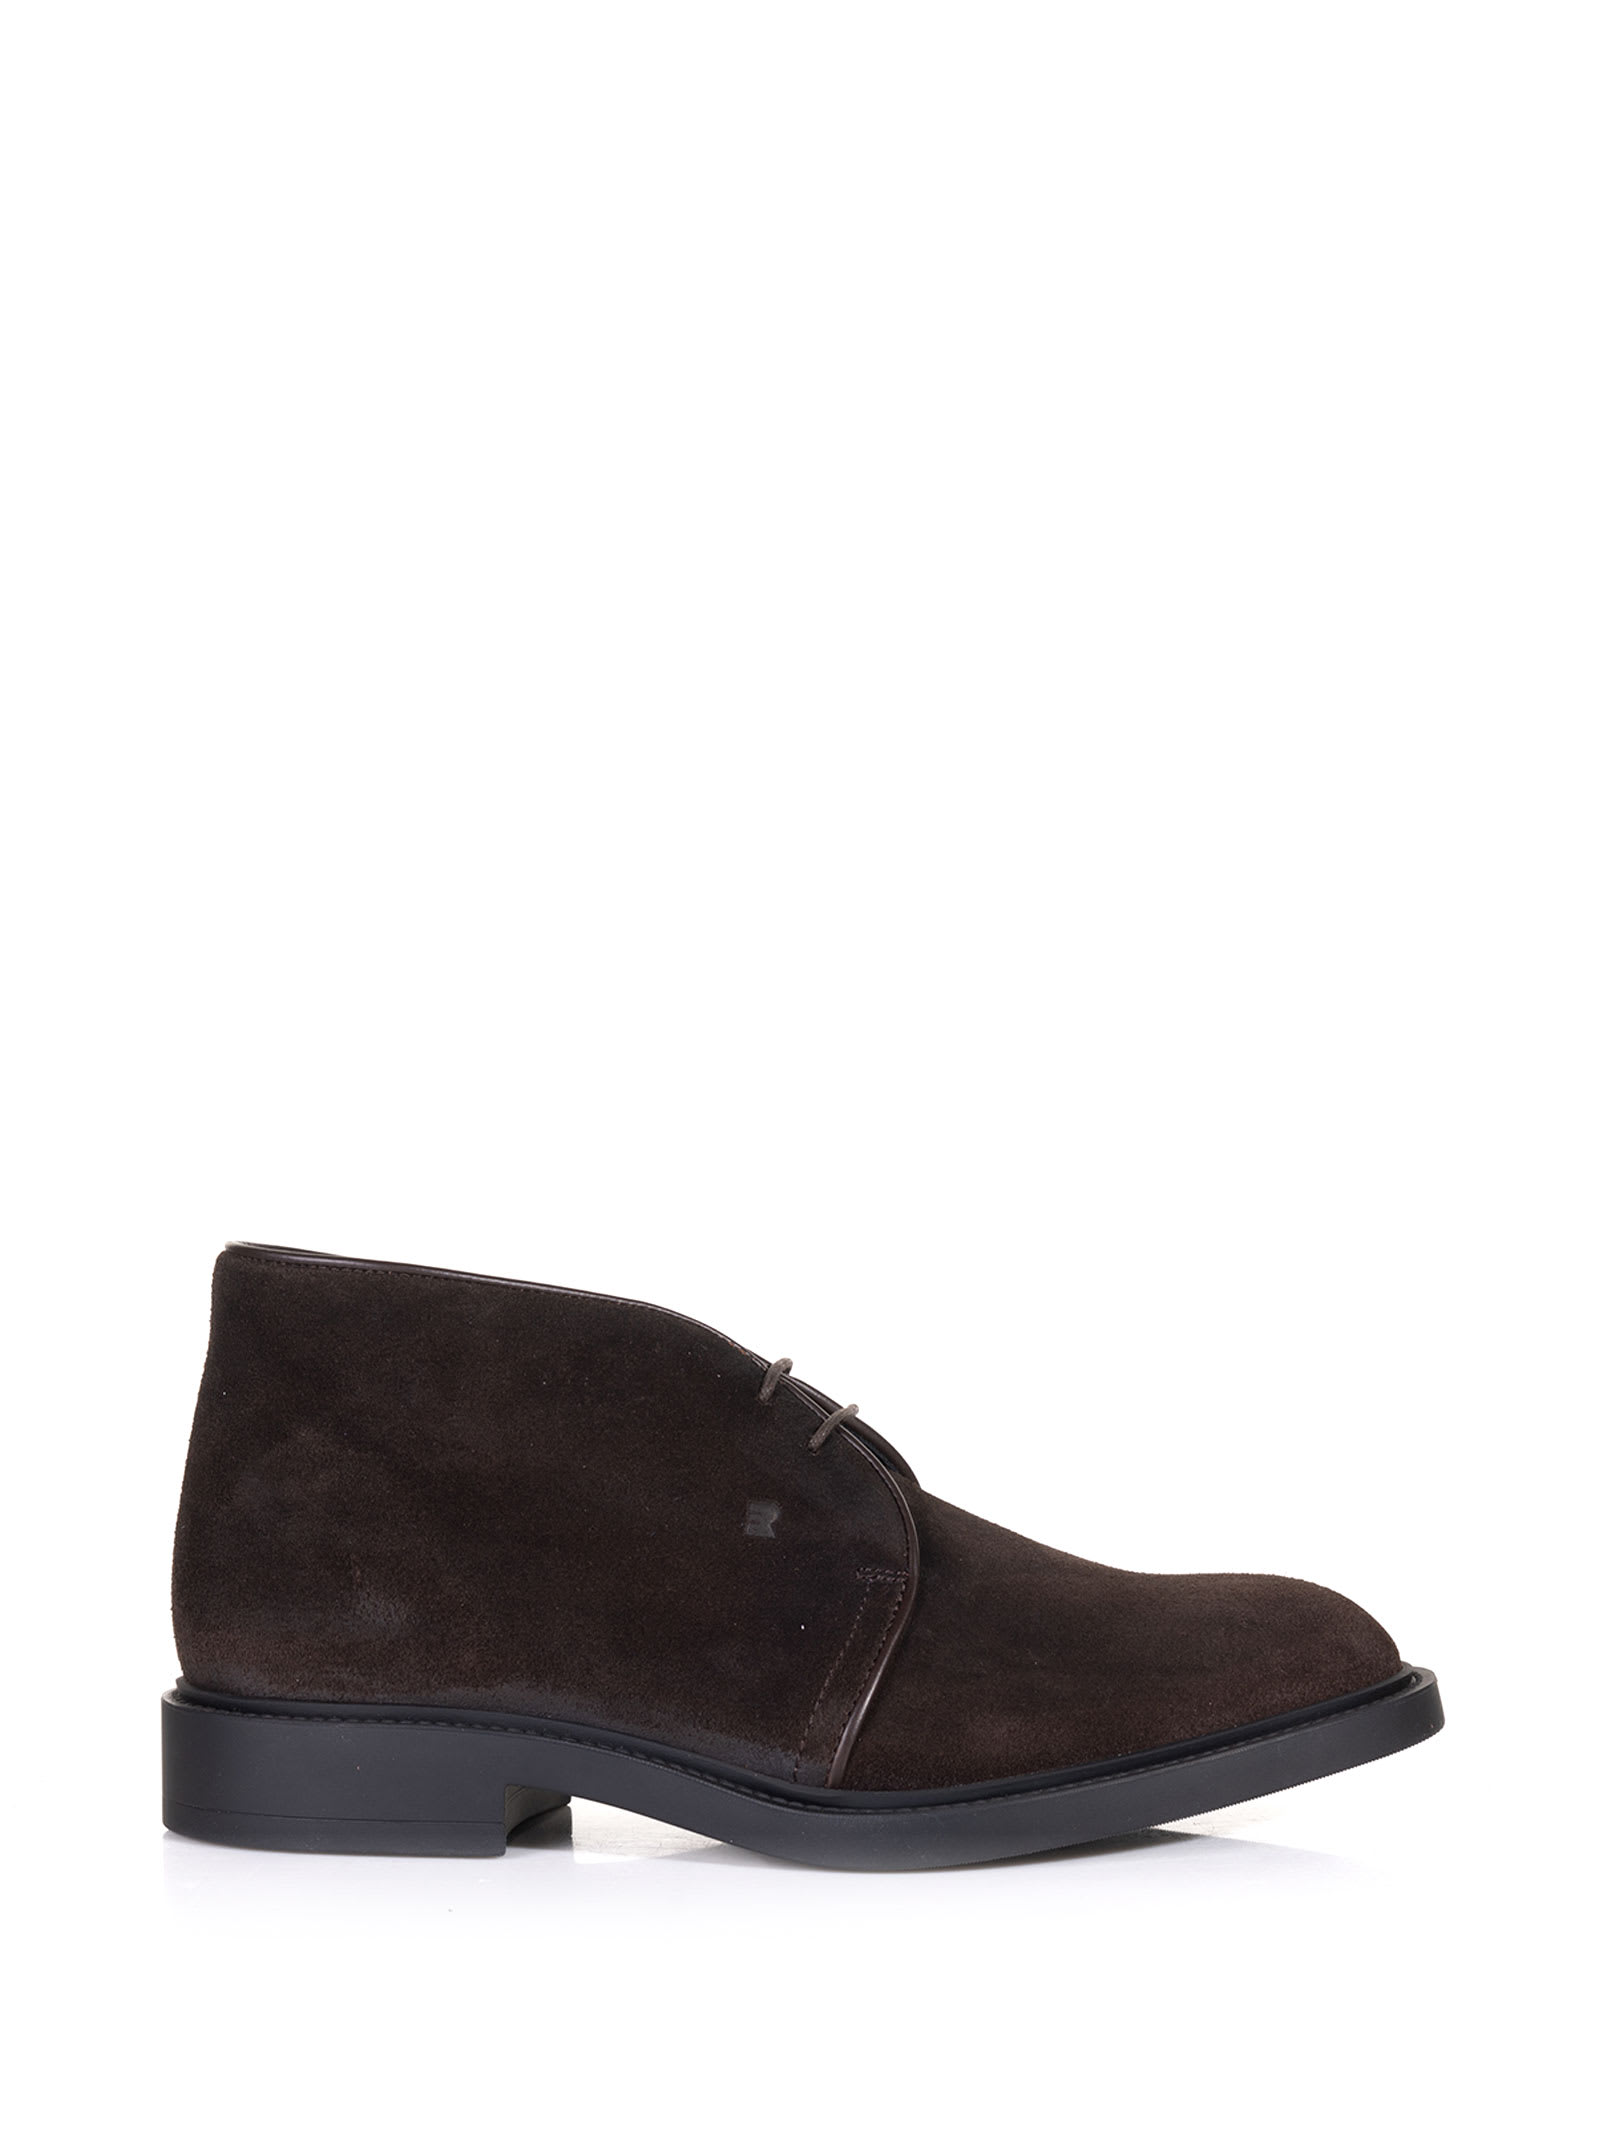 Fratelli Rossetti One Brown Suede Ankle Boot